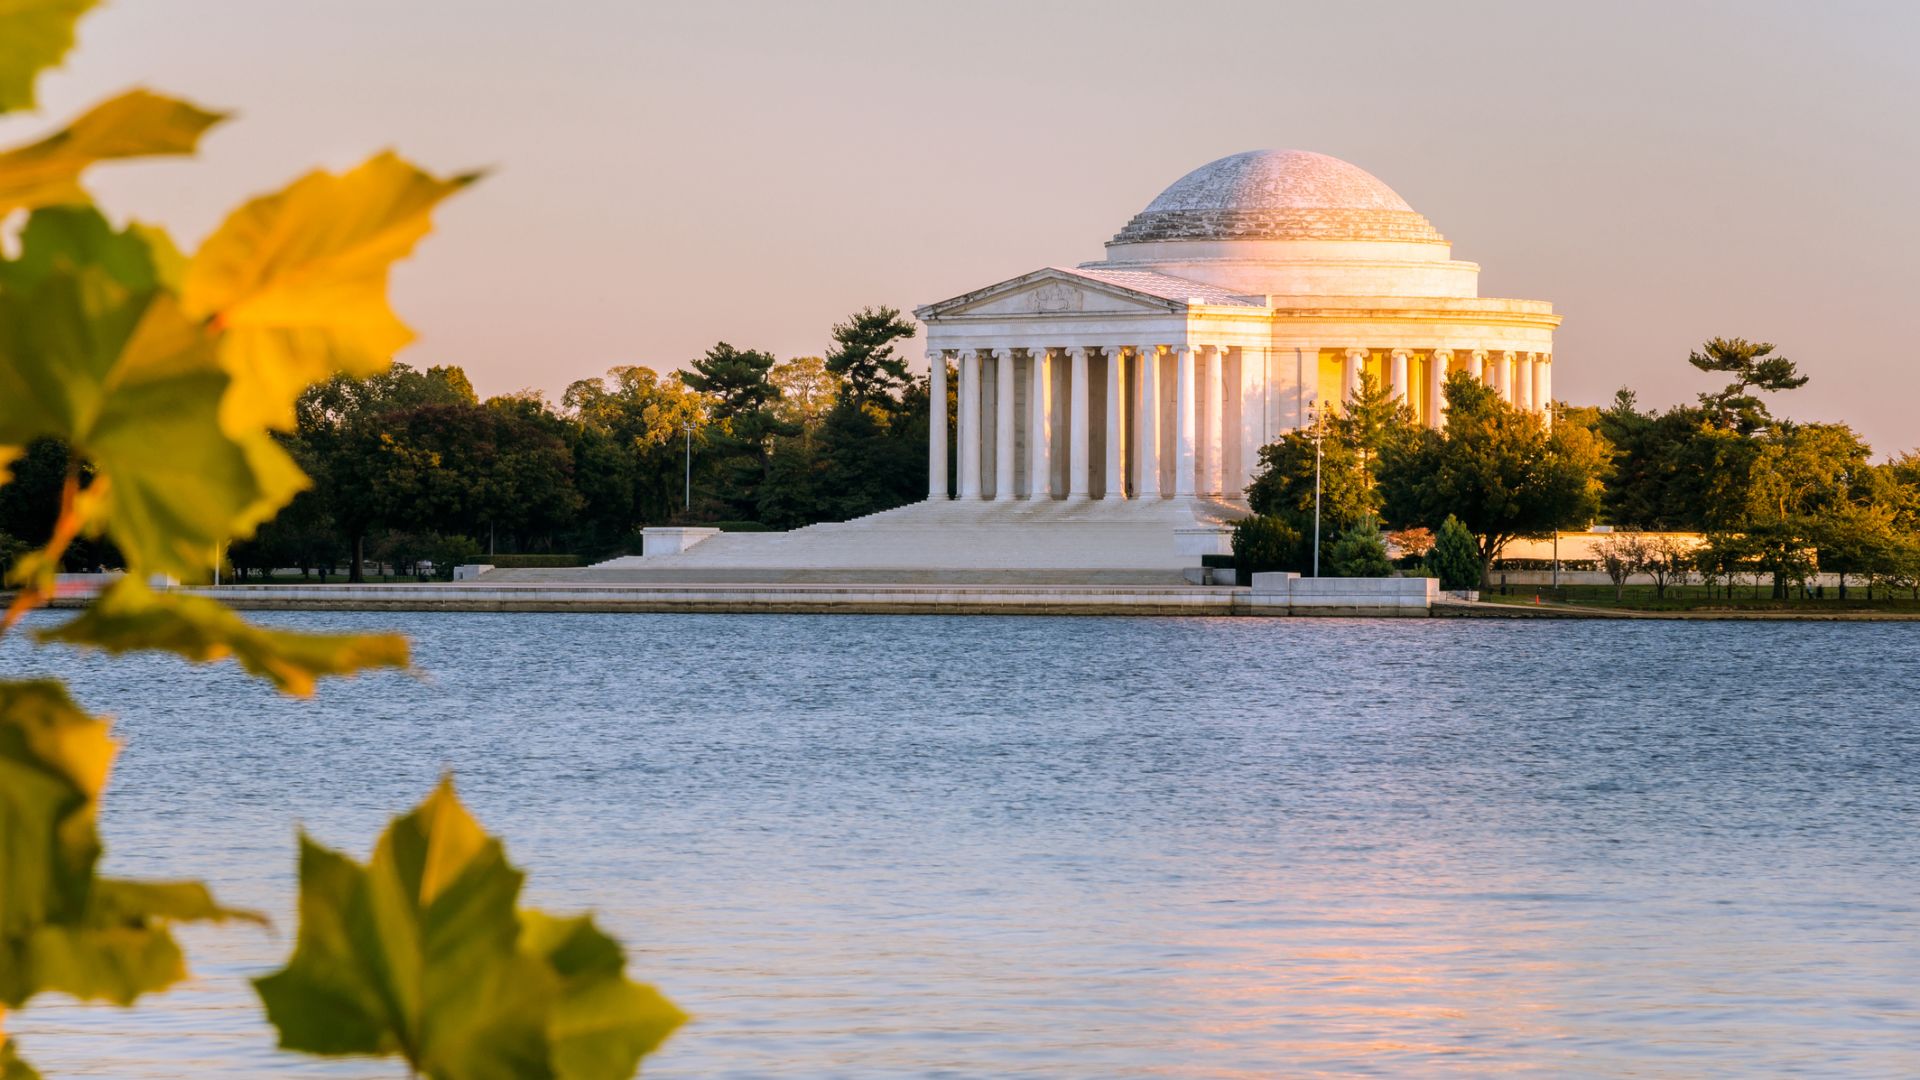 Jefferson Memorial Over A Body Of Water